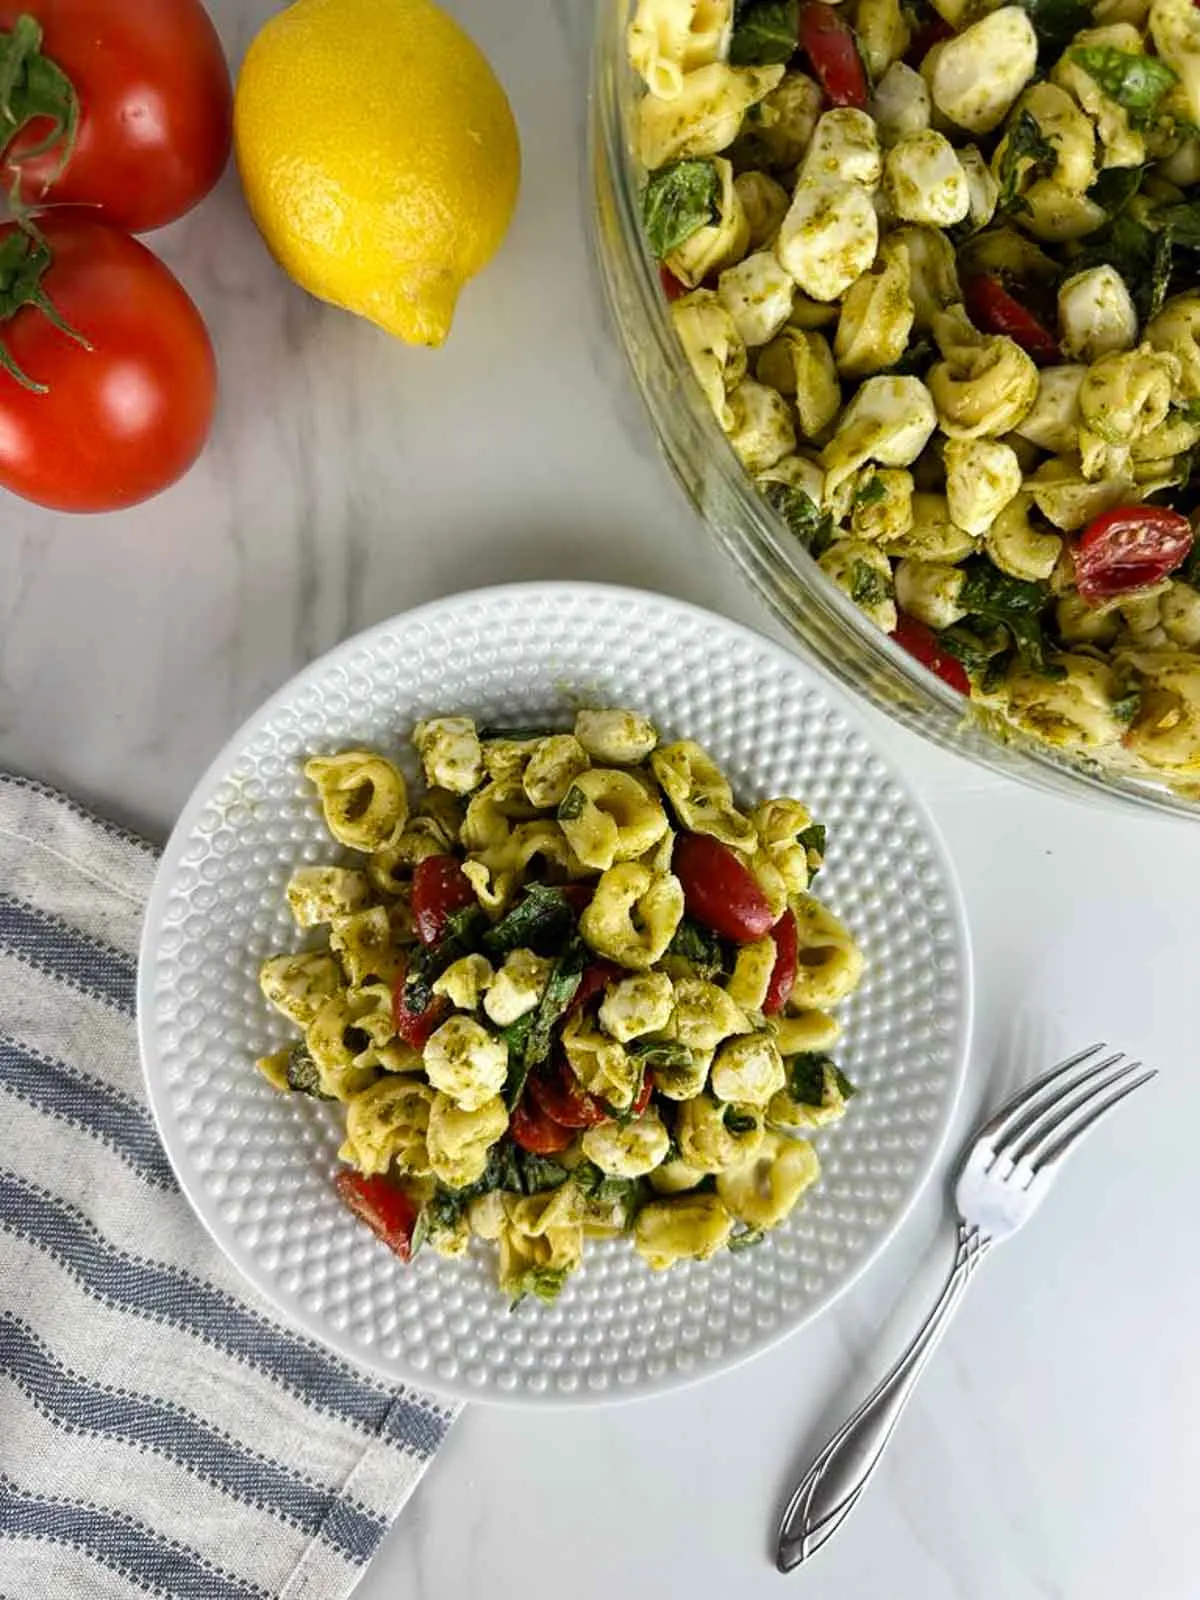 Caprese tortellini pasta salad with pesto is a fresh take on pesto pasta salad. Pillowy cheese tortellini gets tossed with lemon pesto, sweet cherry tomatoes, fragrant basil, and creamy mozzarella for a delicious cold pasta dish you'll love!